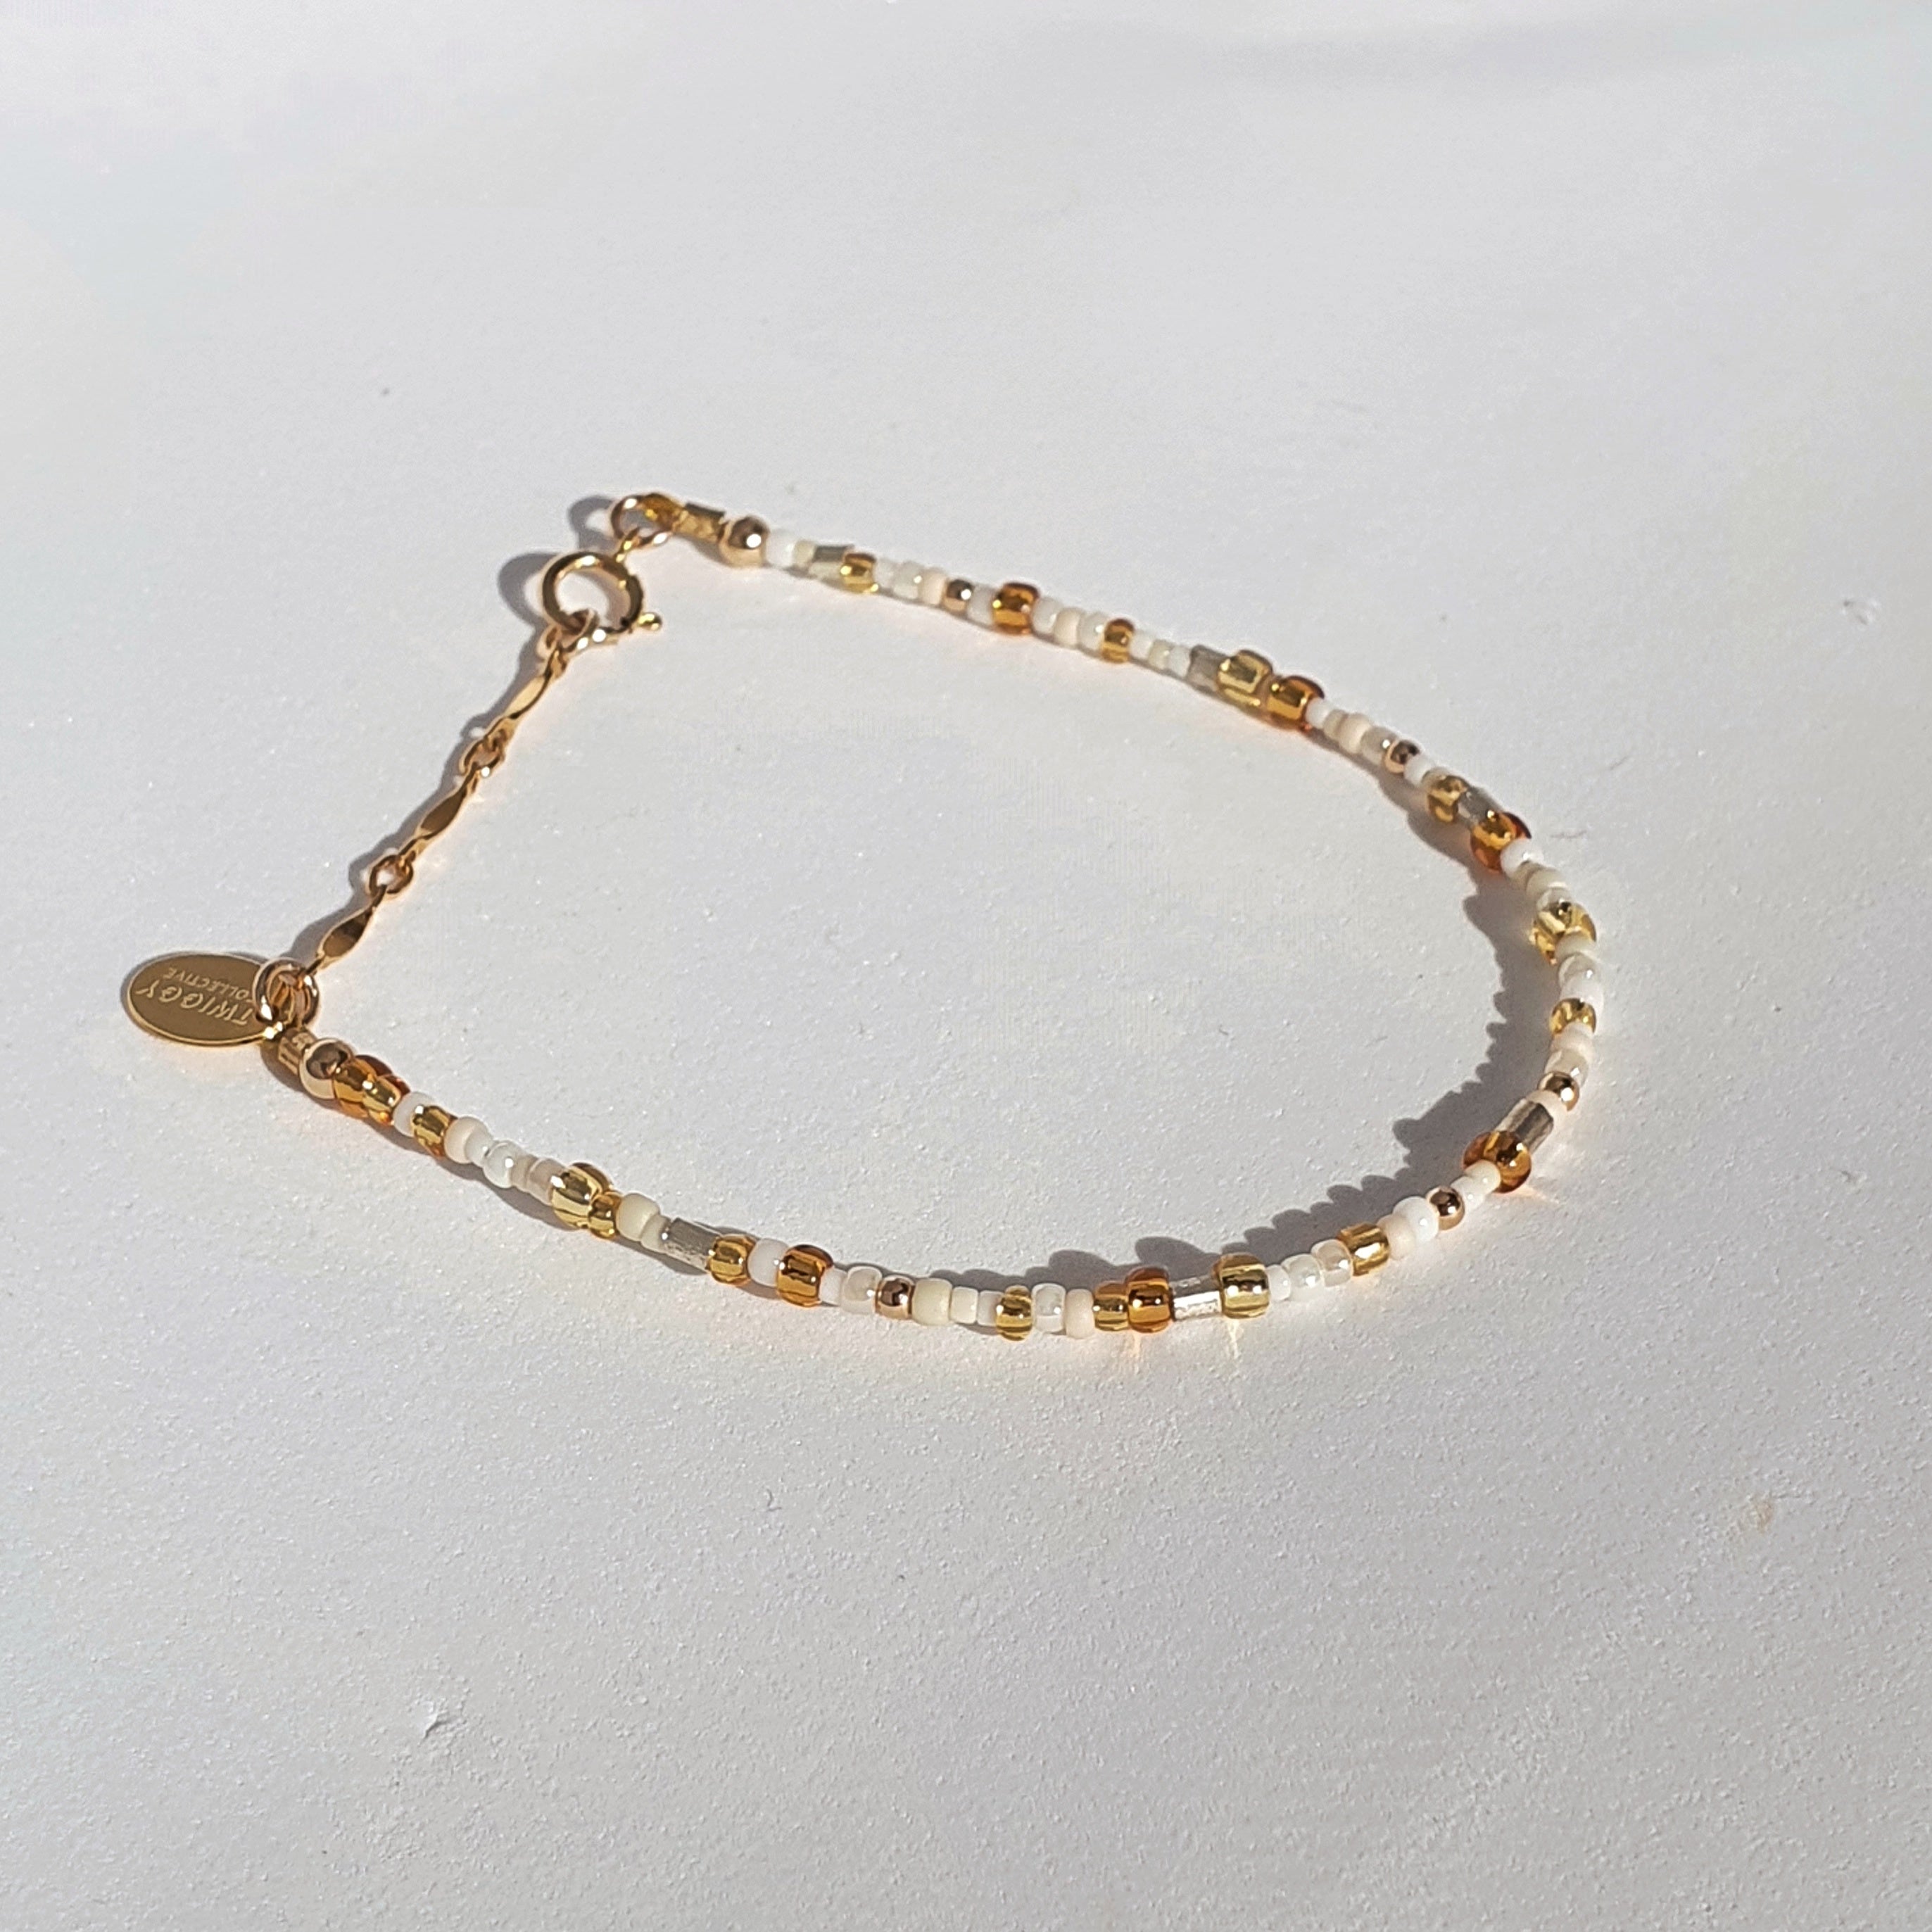 A minimal design featuring glass seed beads, galvanised metal beads and 14Kt gold-filled beads. A mismatched, imperfect design created to compliment any bracelet stack.